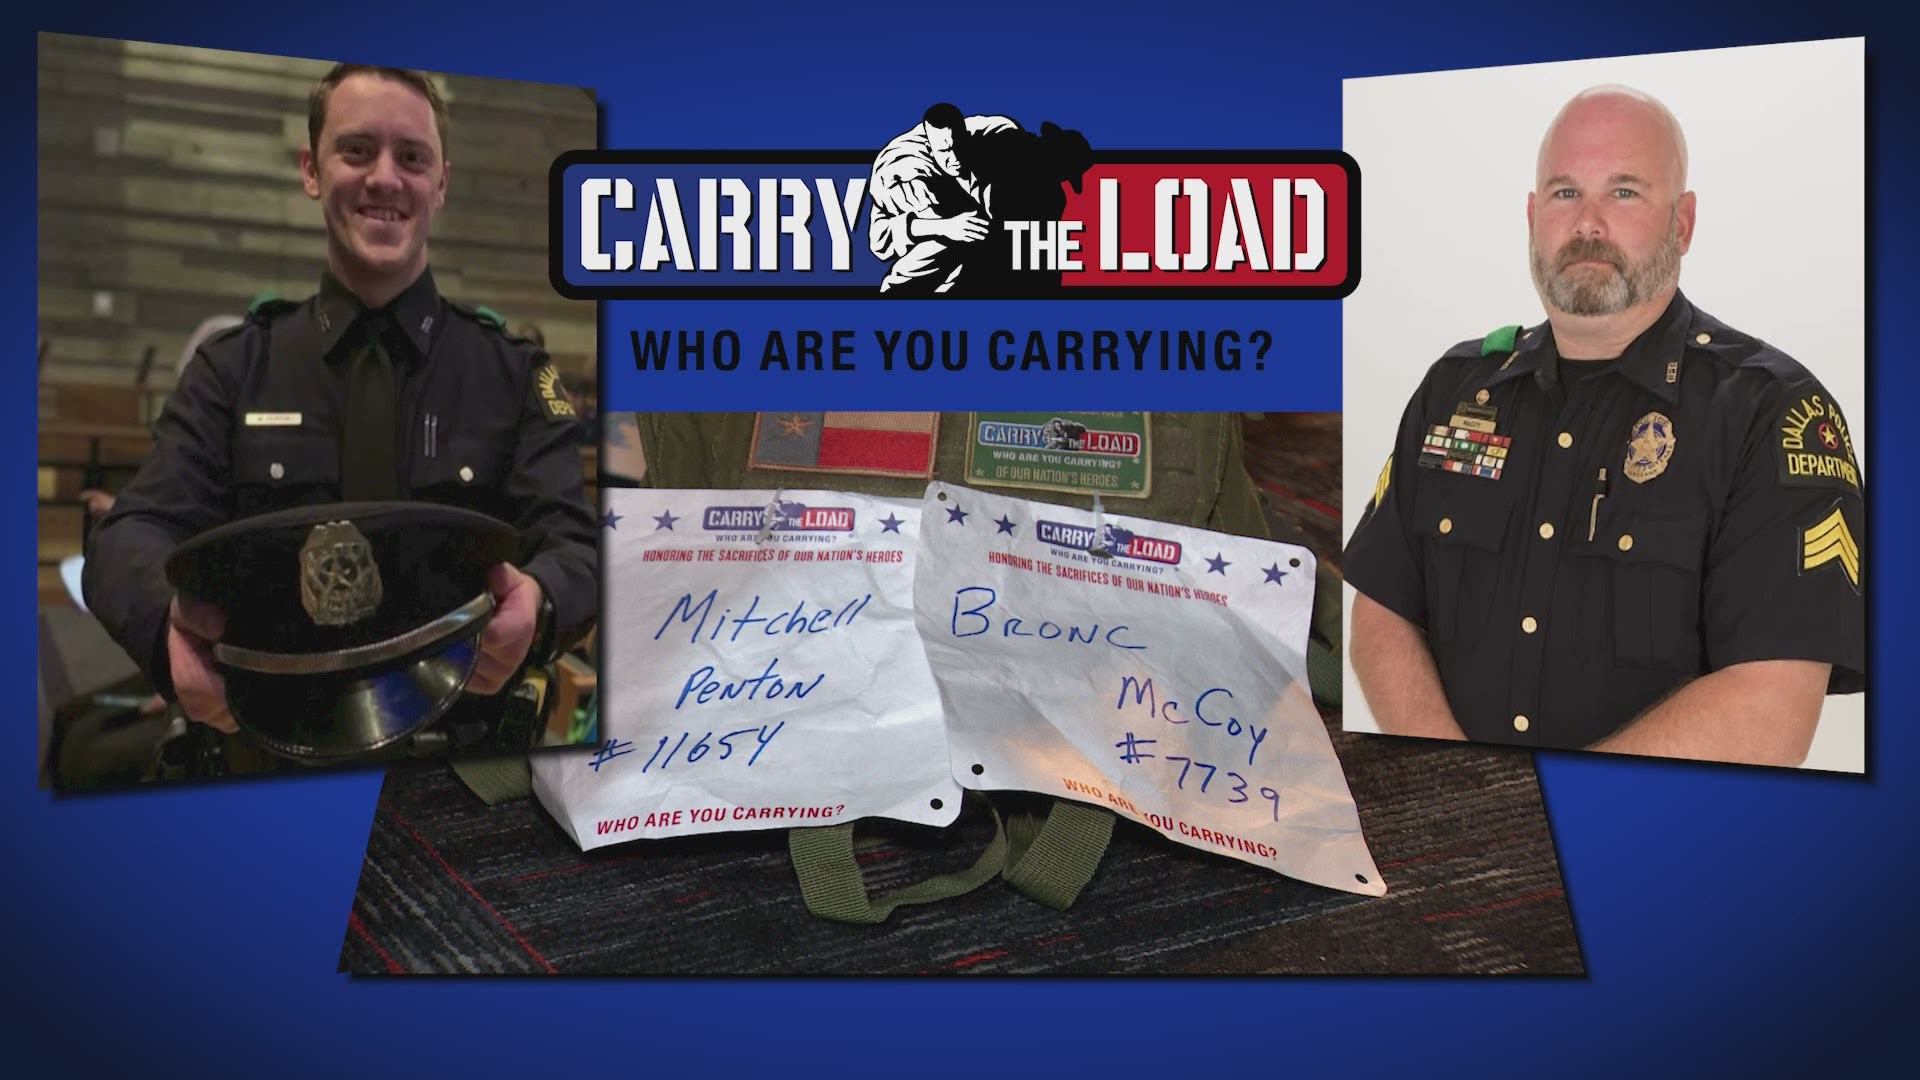 Sgt. Ed Lujan will take his surgically repaired body on the road again as part of Carry the Load's 10th annual event to honor fallen soldiers and first responders.